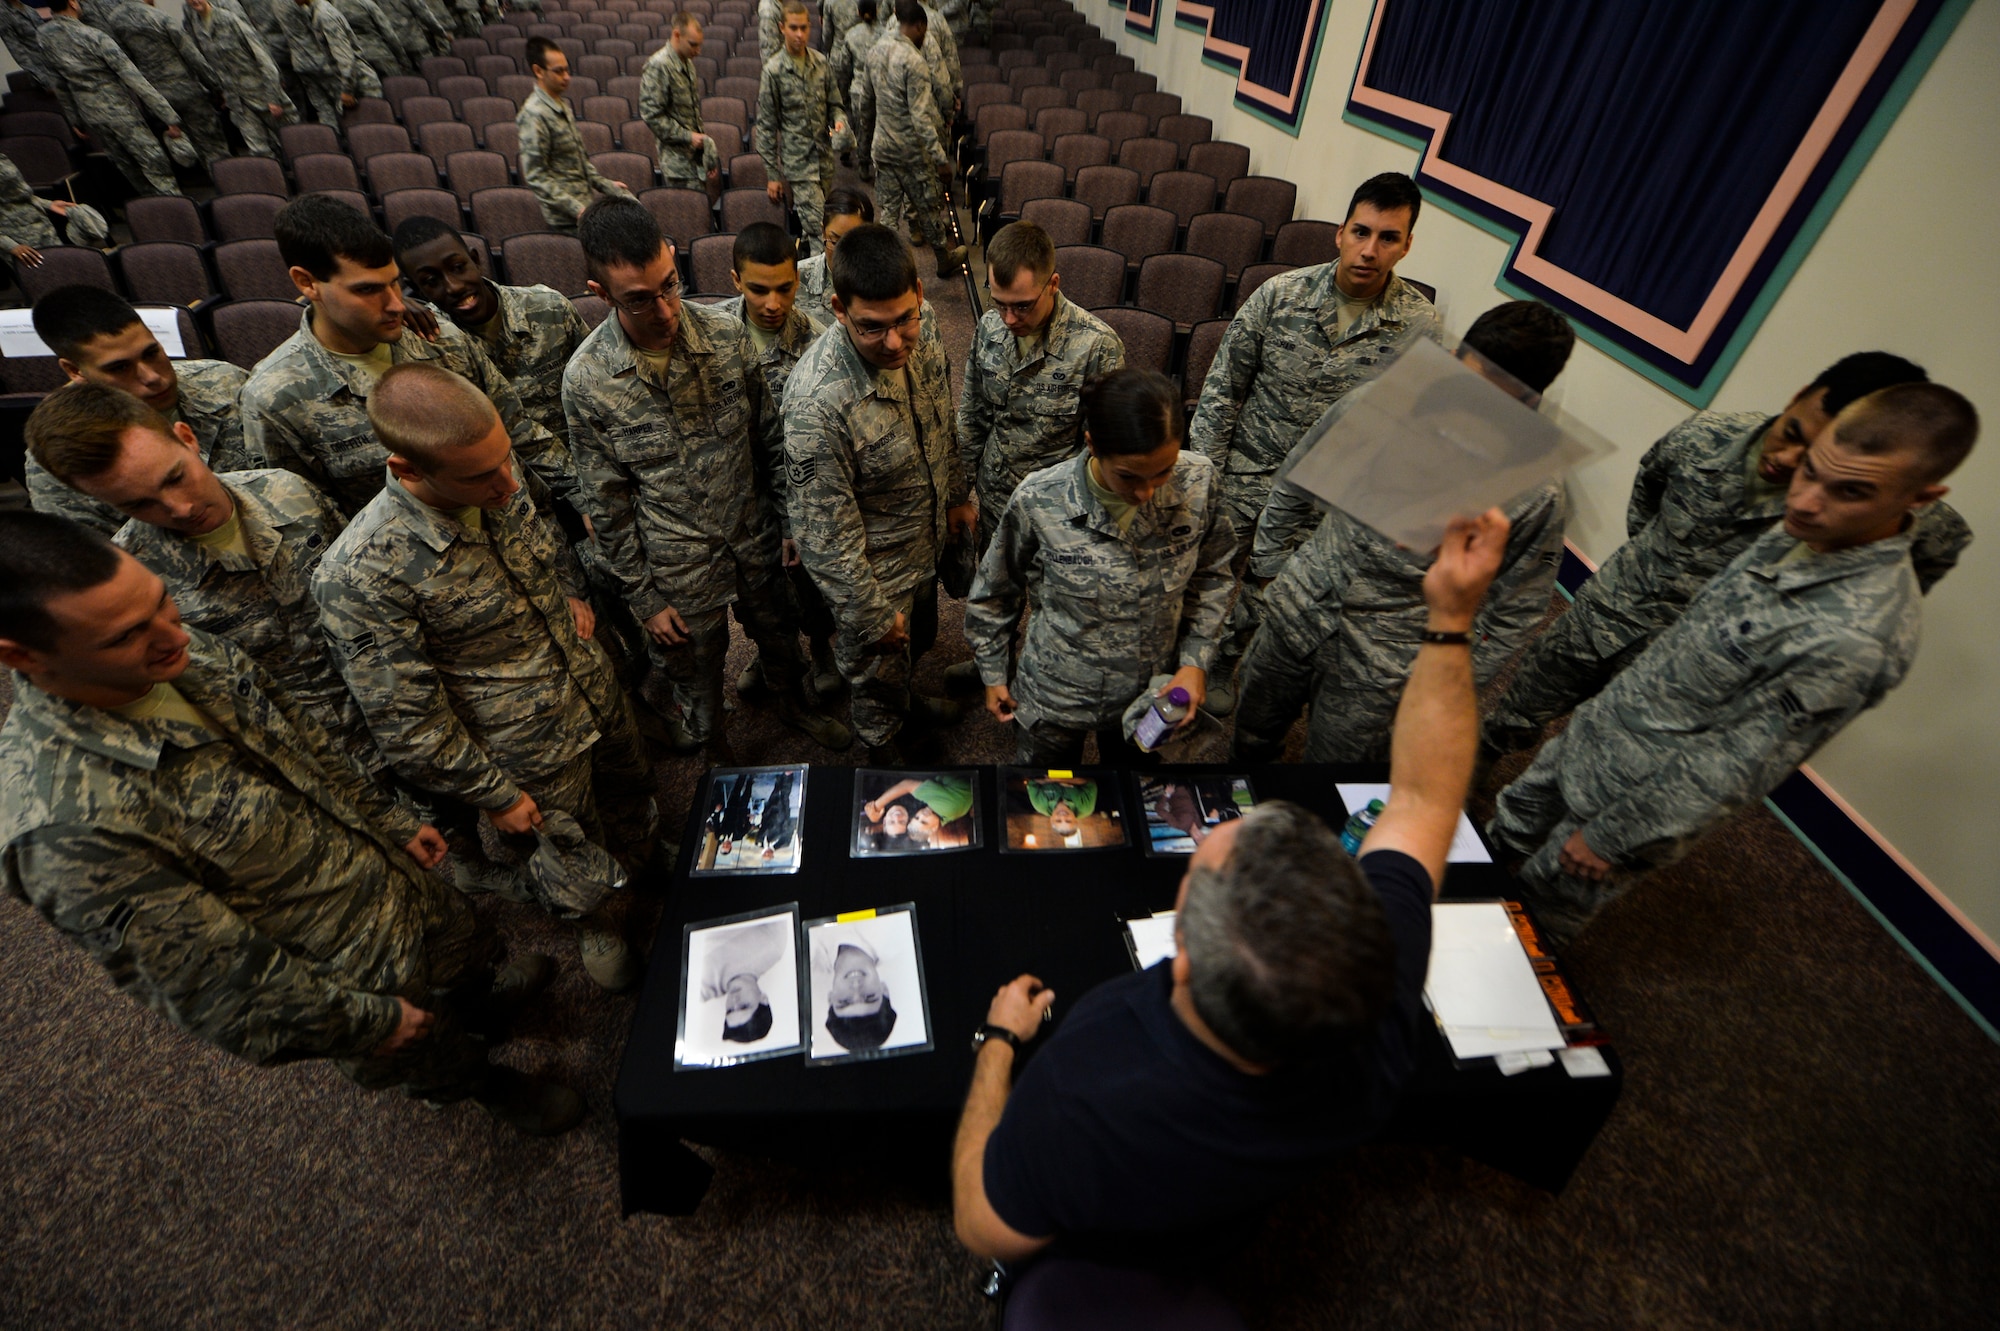 Comedian Bernie McGrenahan shows Airmen pictures of his family while at King Auditorium, Hurlburt Field, Fla., Sept. 24, 2014. McGrenahan spoke about the importance of resiliency in a humor filled presentation. (U.S. Air Force photo/Senior Airman Christopher Callaway)  